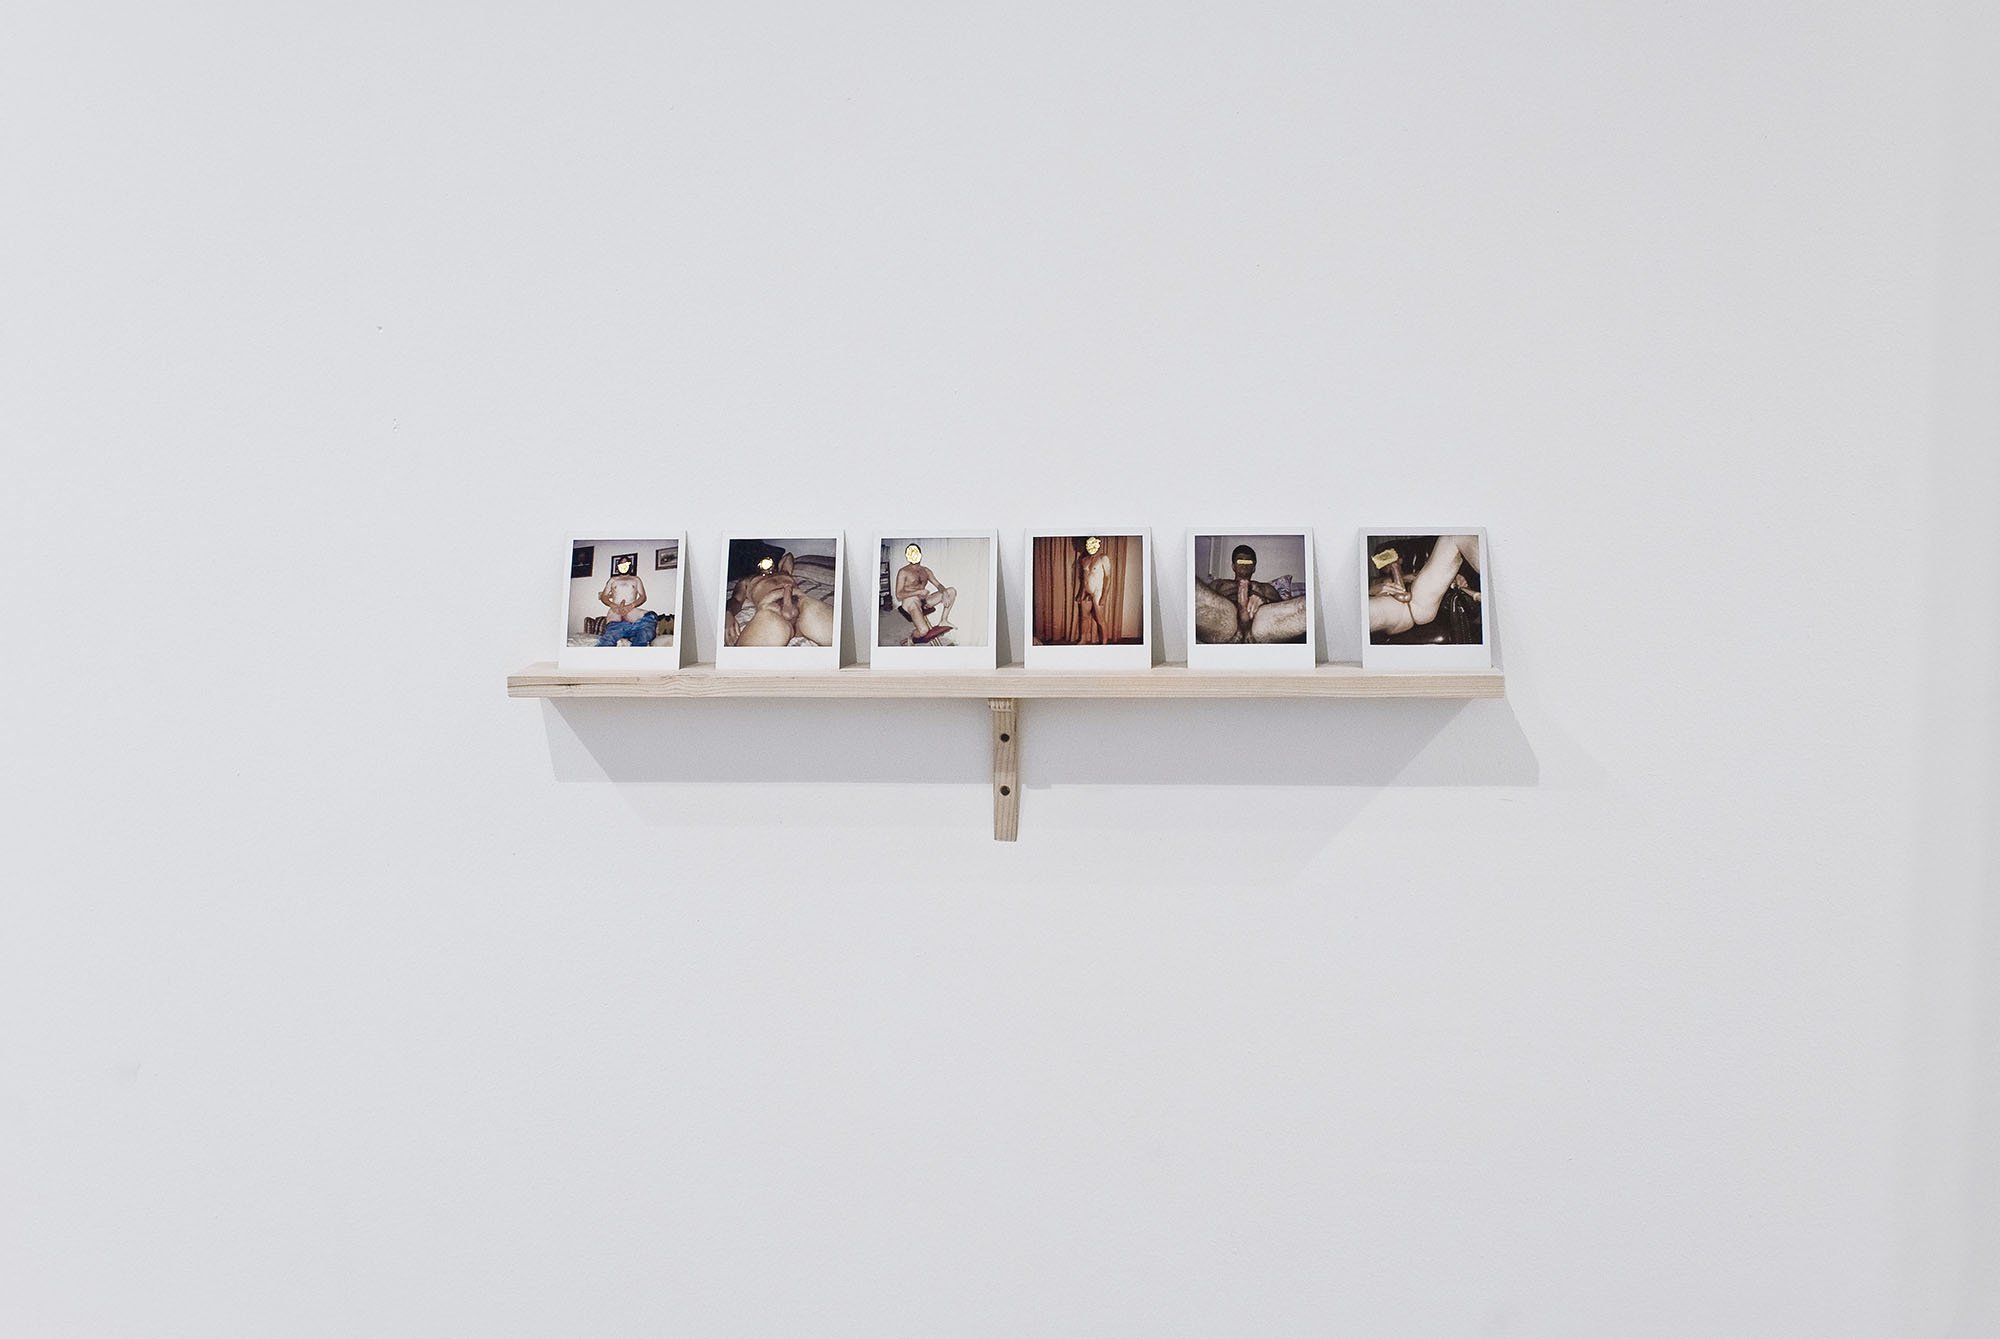 Steve Reinke, Untitled: The Flawed and the Fallen, six found polaroids with metal leaf on a shelf, 8.8 x 10.9 cm (3 1/2 x 4 1/4 in), 2004